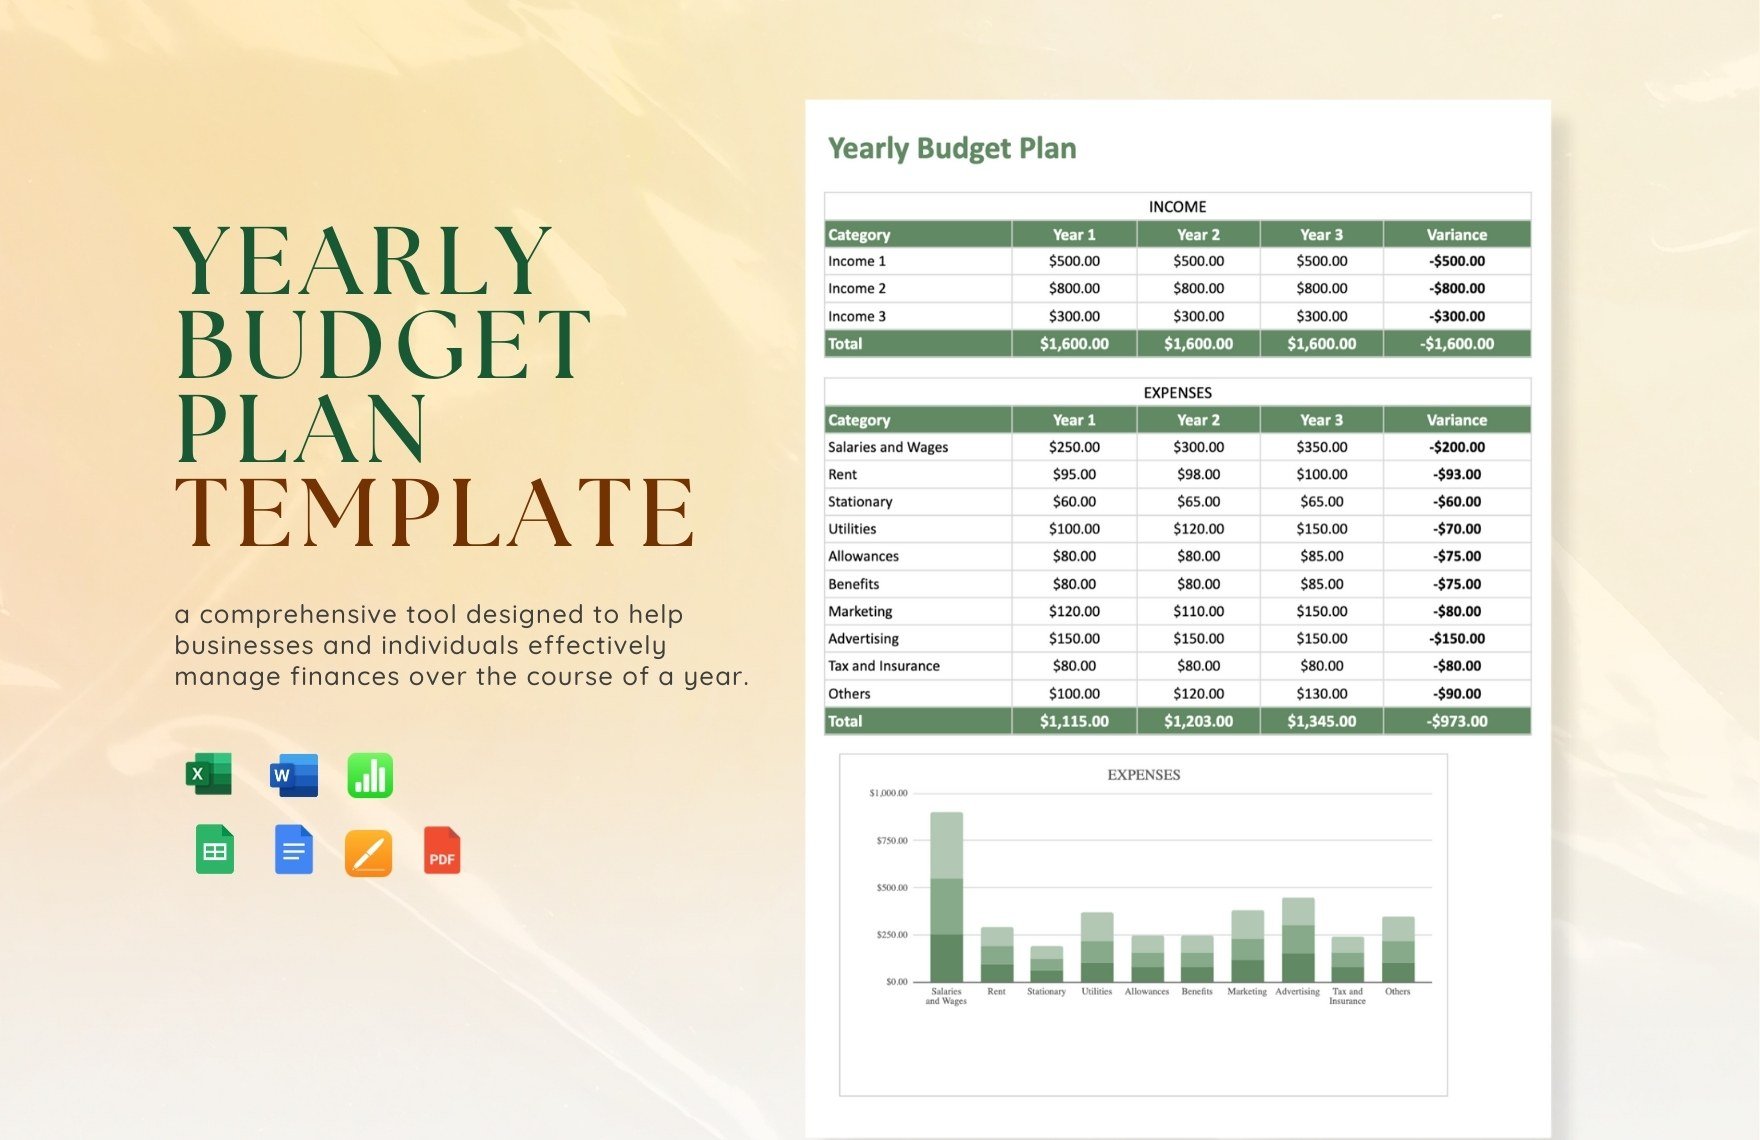 Yearly Budget Plan Template in Word, Google Docs, Excel, PDF, Google Sheets, Apple Pages, Apple Numbers